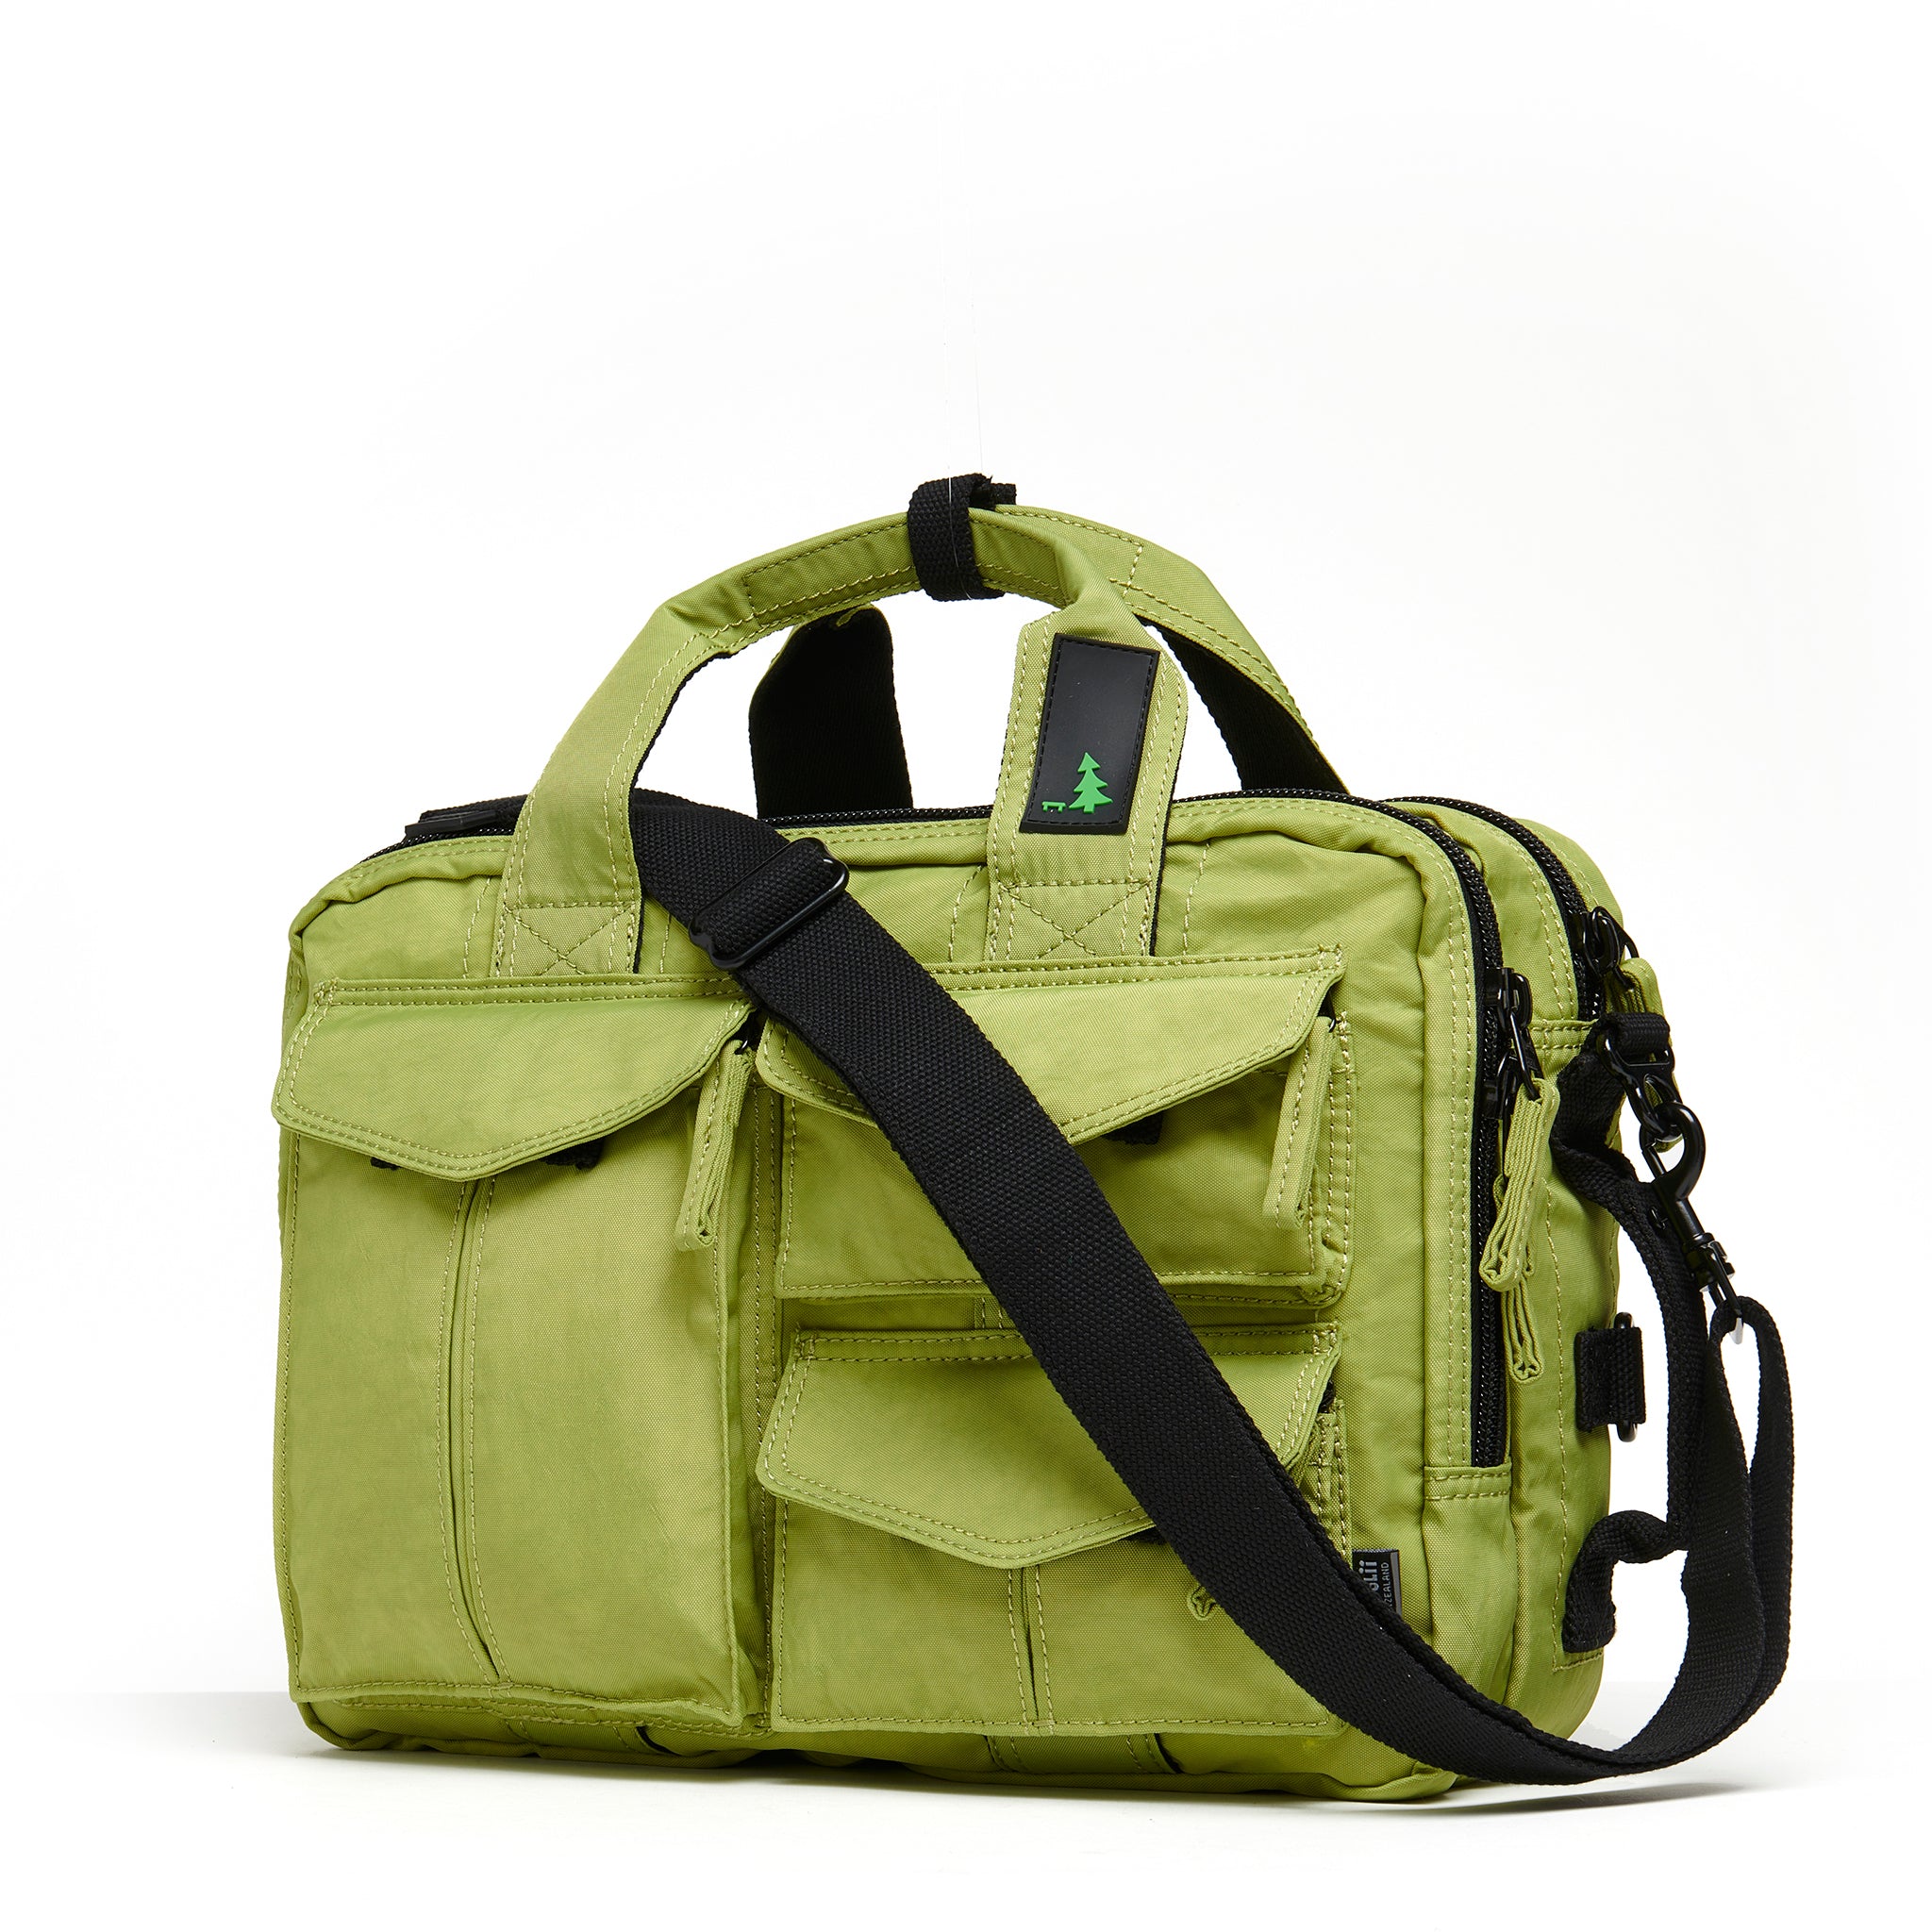 Mueslii classic 3 ways that can be used as backpack a shoulder bag or a briefcase, color  green,side view.